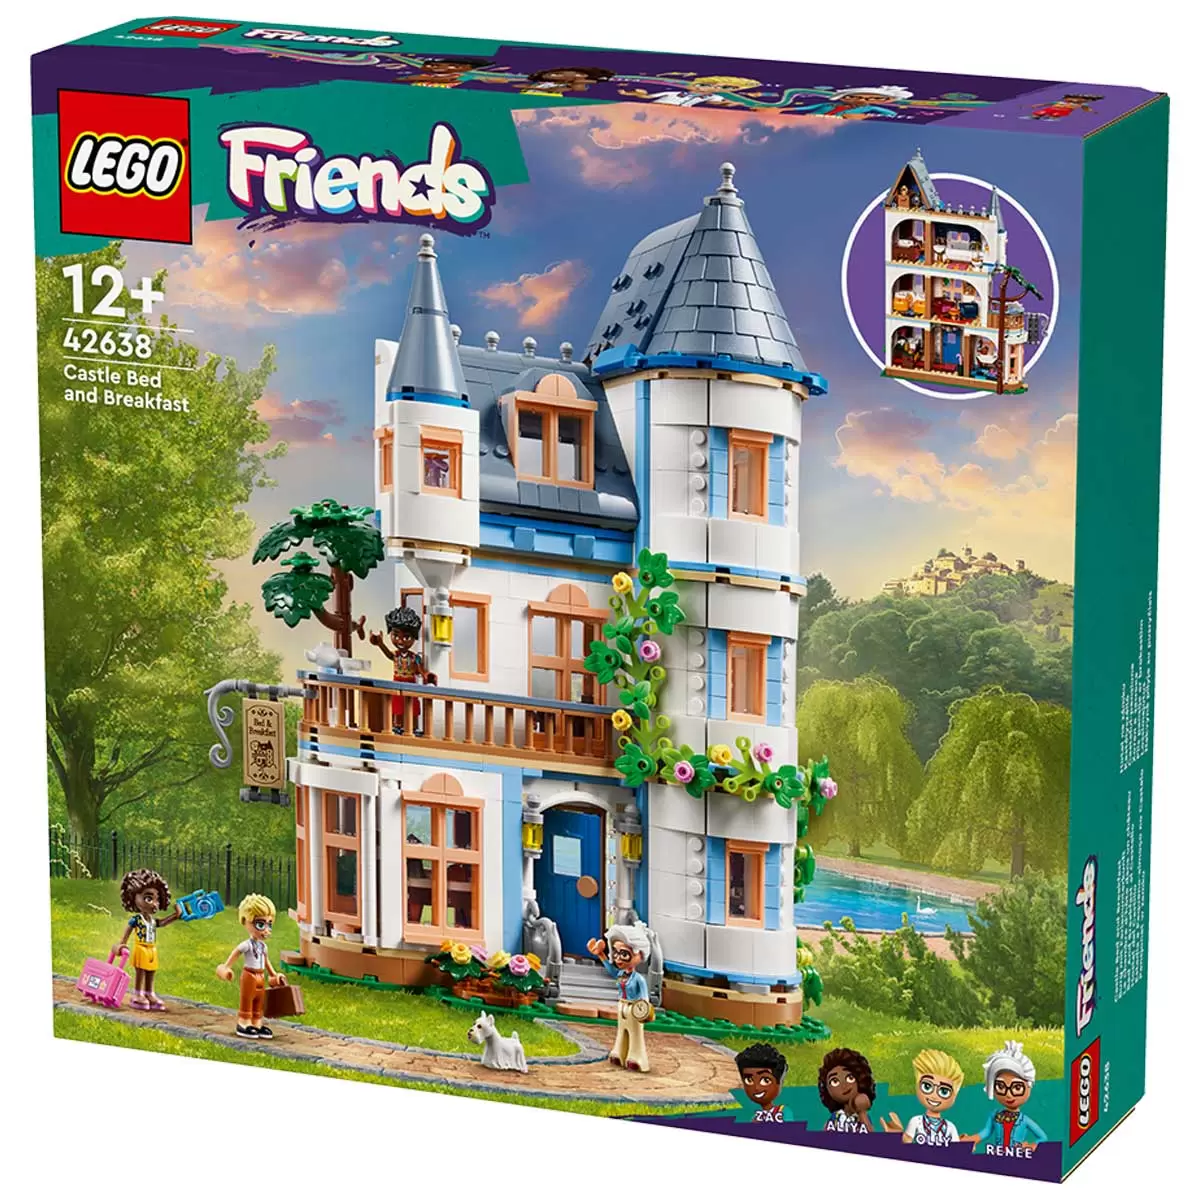 LEGO Friends Castle Bed and Breakfast 42638